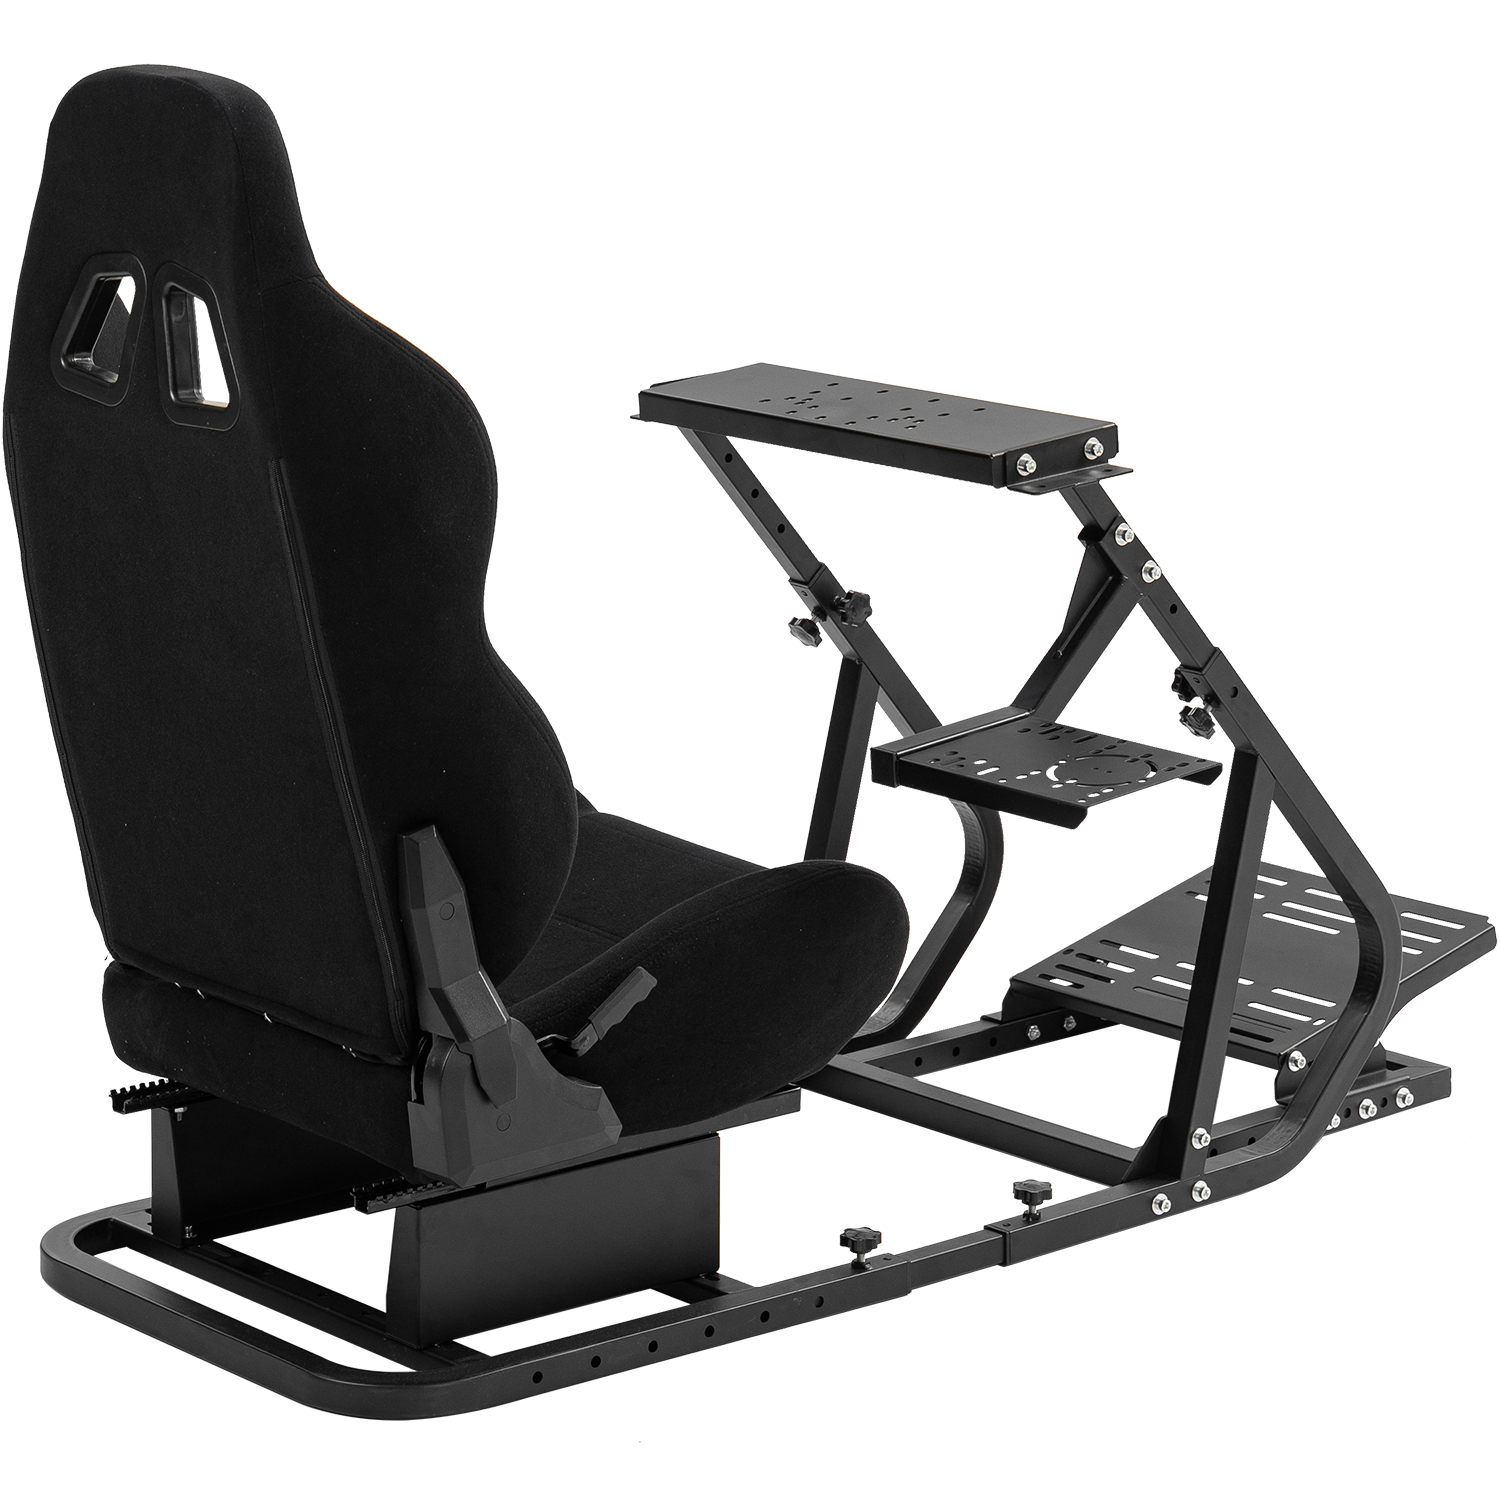 Minneer Driving Simulator Cockpit with Gaming Seat Fit Logitech G29 Thrustmaster